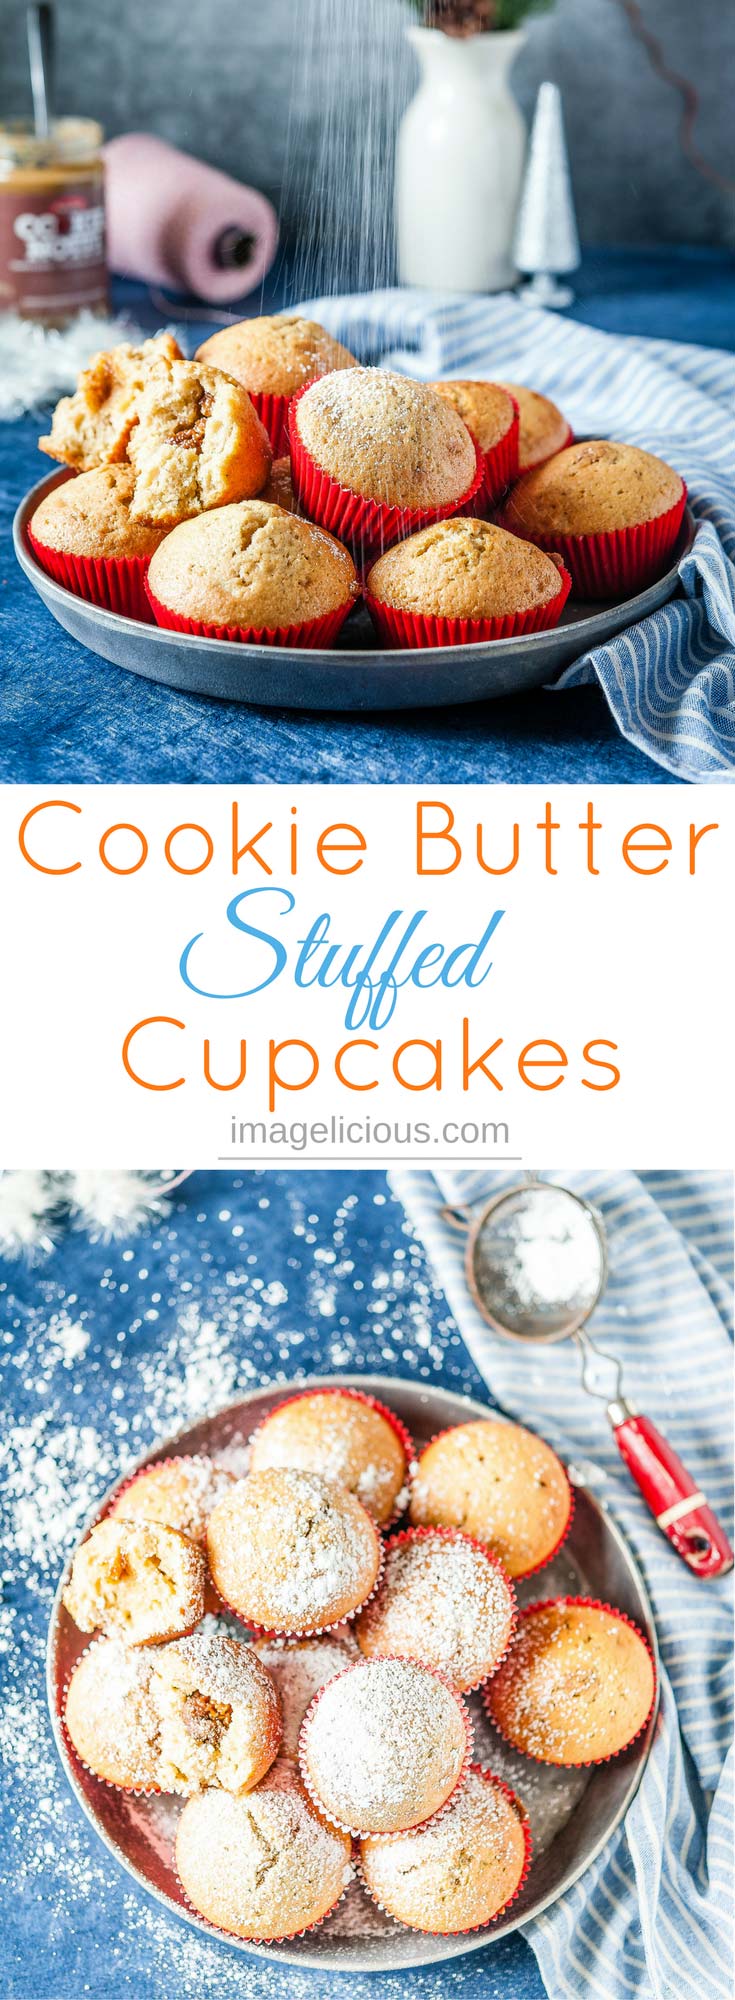 These Cookie Butter Stuffed Cupcakes are soft, fluffy, spicy, and delicious. Filled with delicious cookie butter, they are a perfect treat during Christmas Holidays | Imagelicious #CookieButter #Cupcakes #Desserts #ChristmasBaking #Speculaas